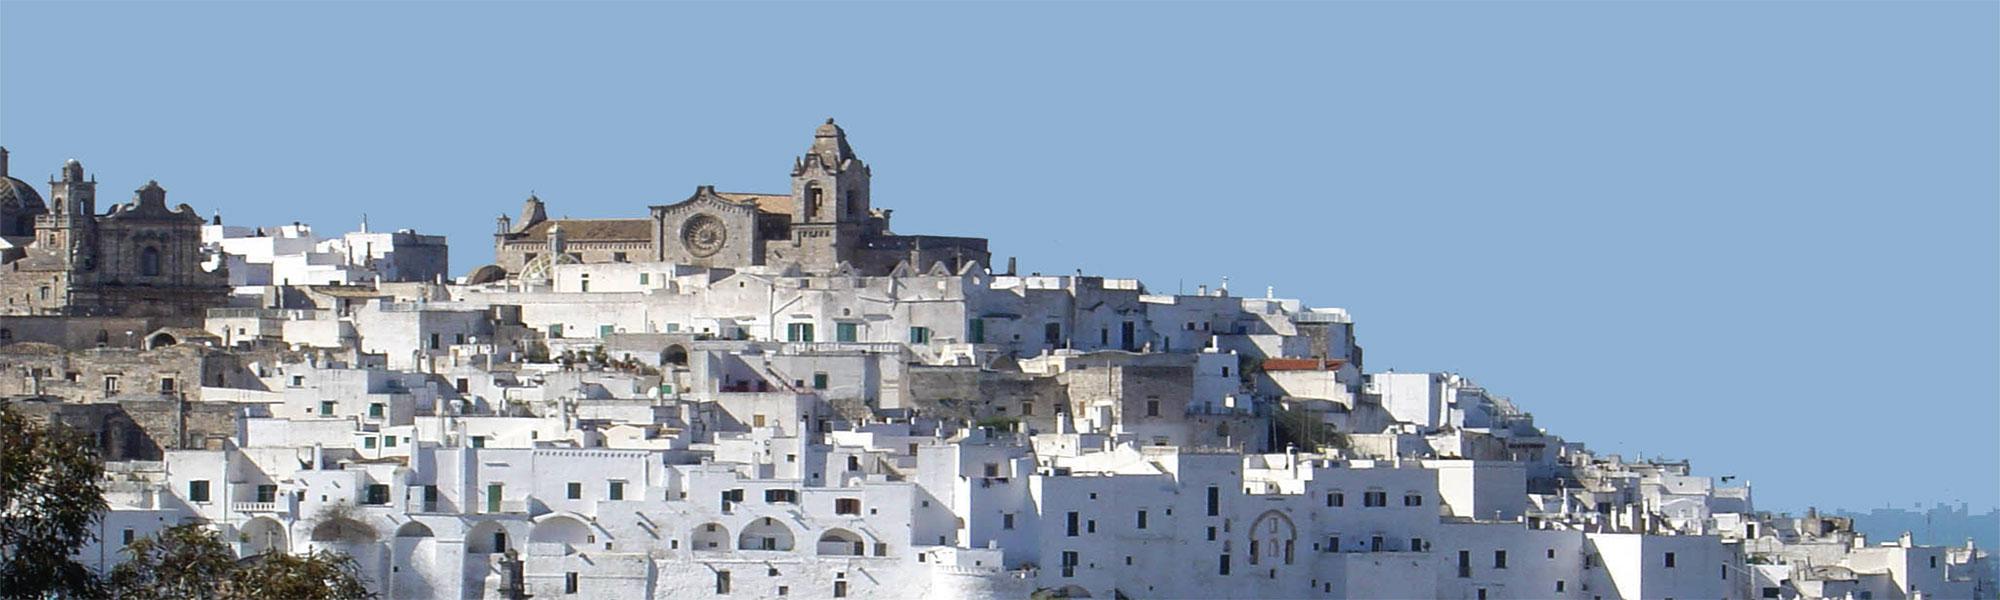 Best things to see and monuments in Ostuni, Puglia - Agriturismo Masseria Salento 1